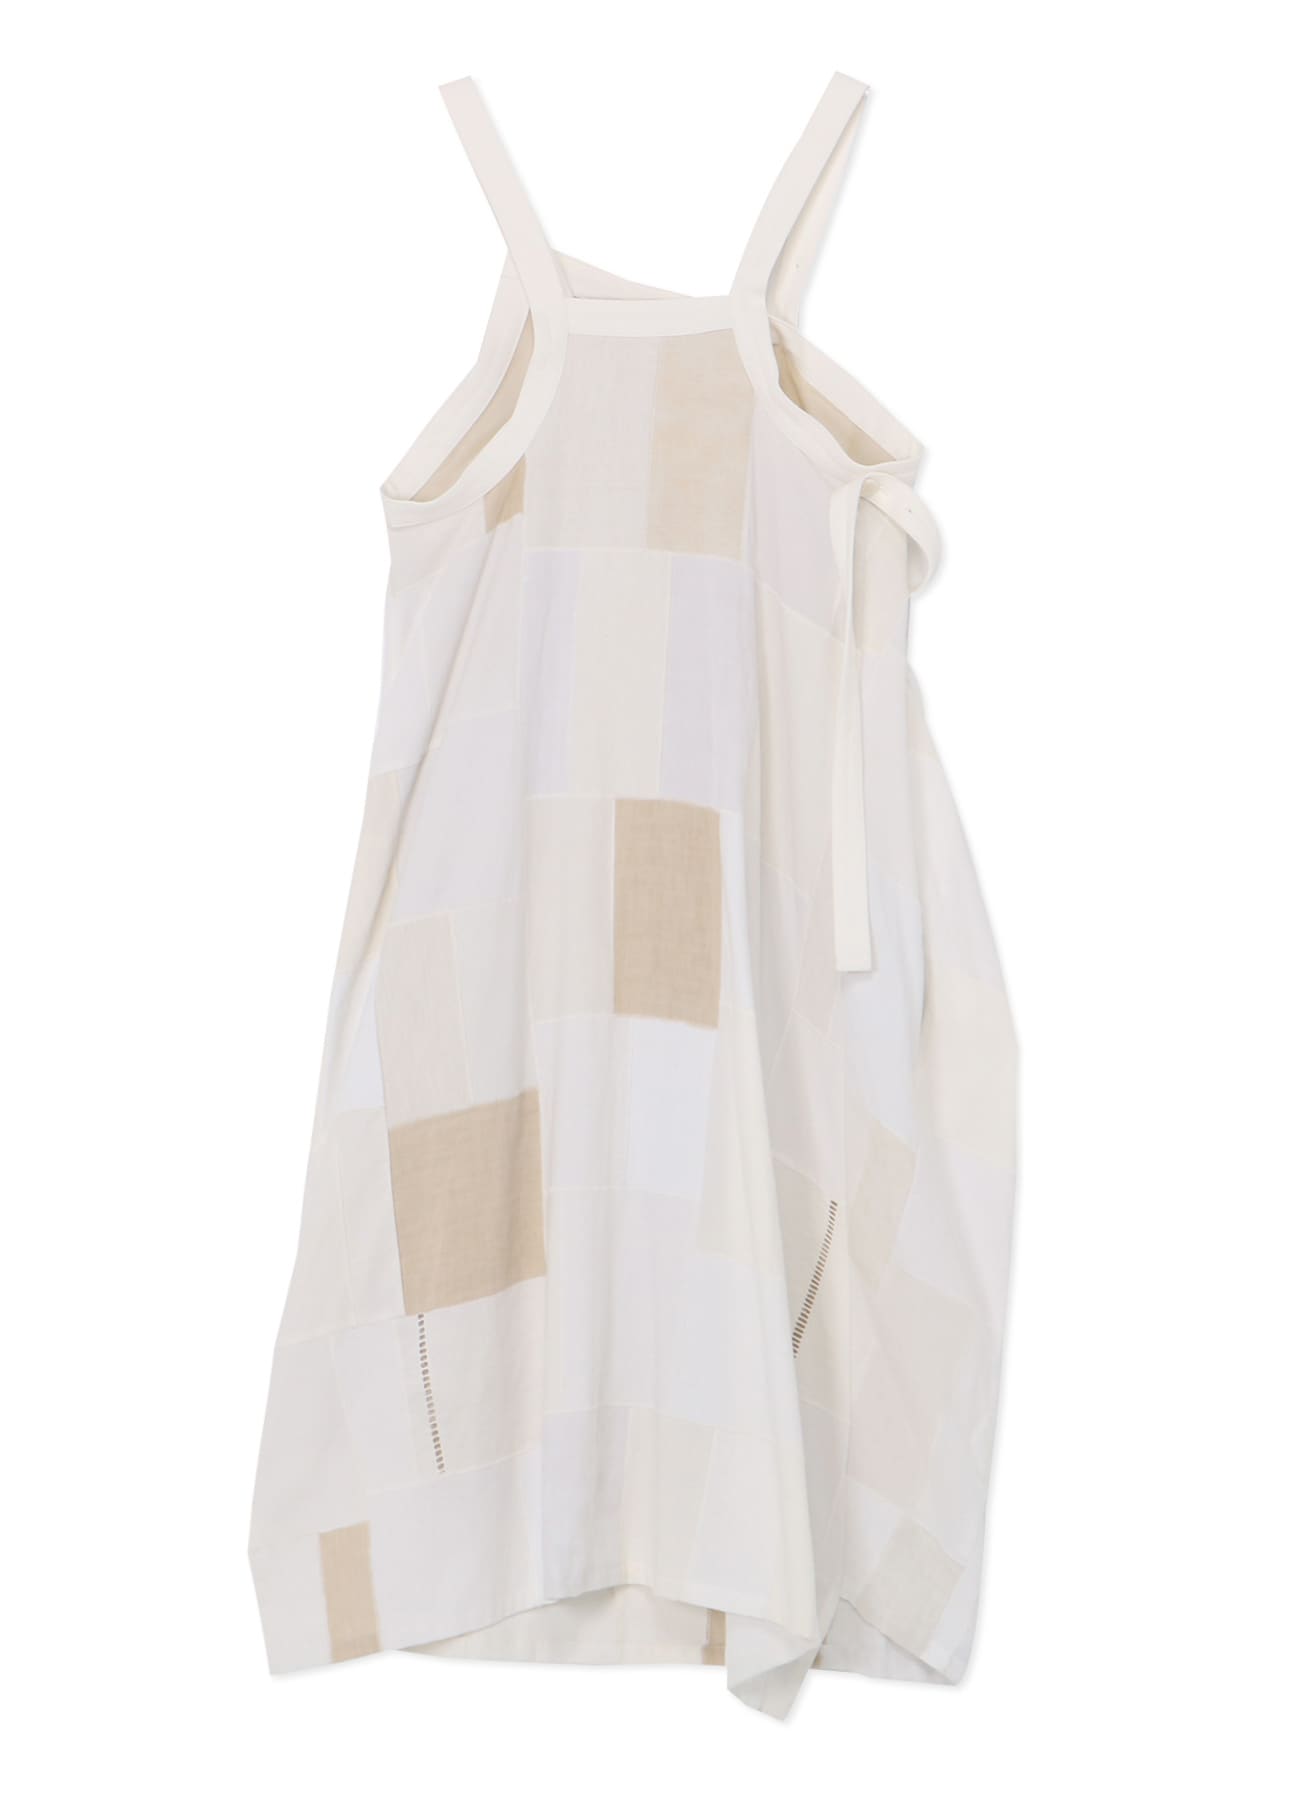 [Y’s KHADI COLLECTION]PATCHWORK SLEEVELESS DRESS